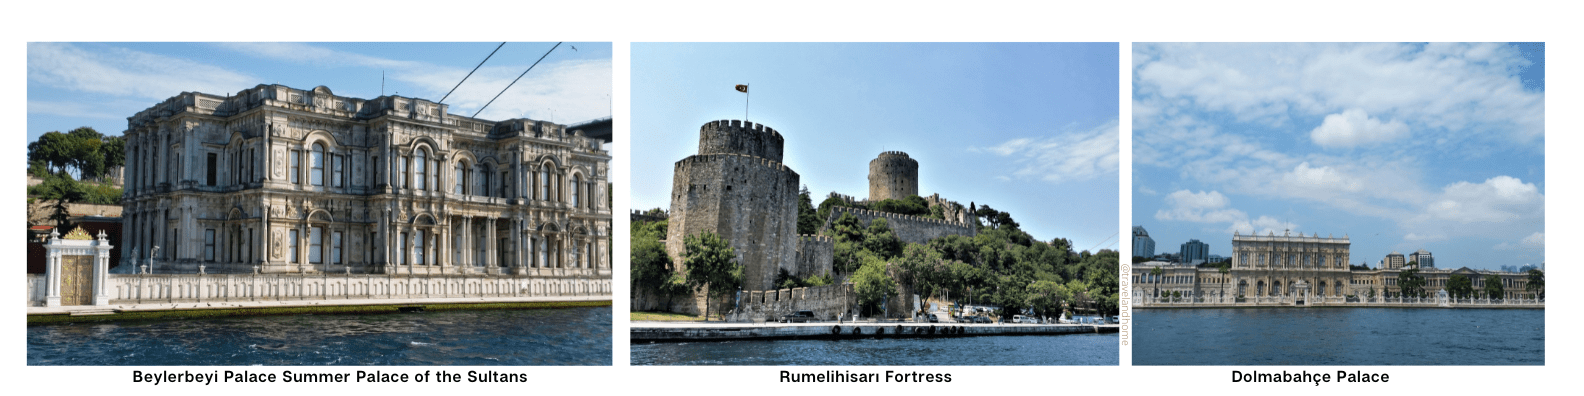 Istanbul lunch cruise Dolmabahce Palace Rumelihisari Fortress Beylerbeyi Palace Summer Palace of the Sultans min